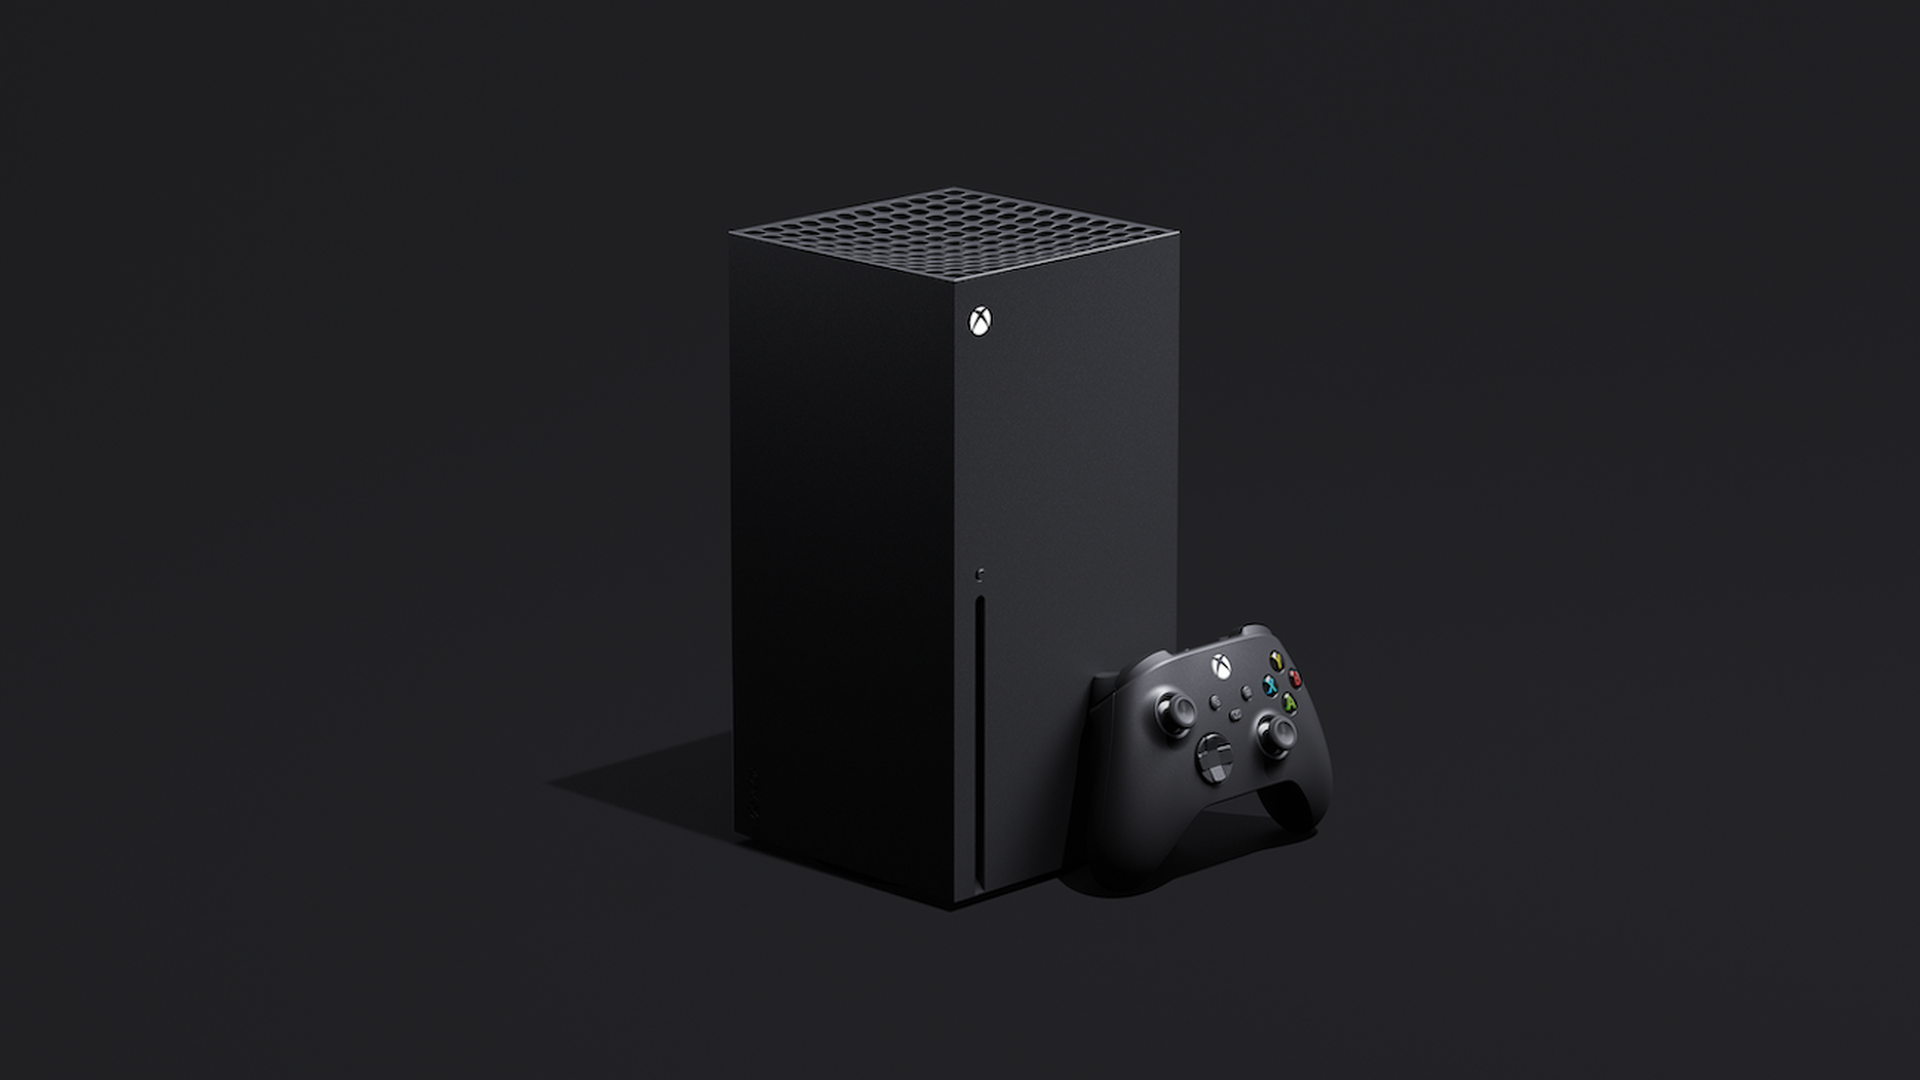 Image of a black Xbox console and controller in front of a black background